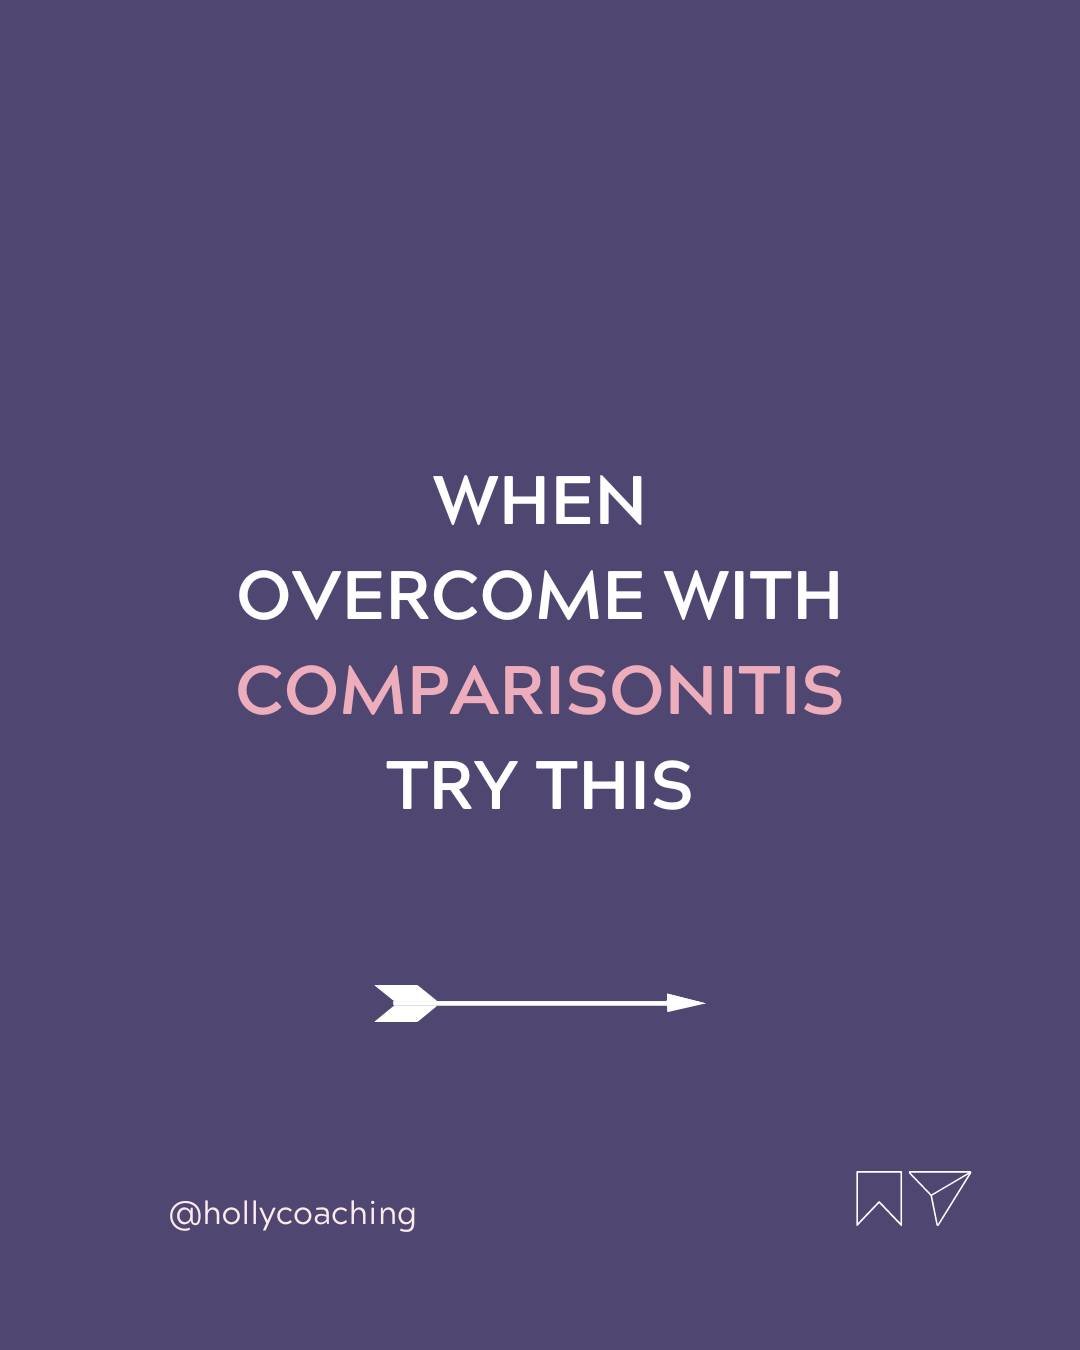 Comparisonitis often arises from feelings of inadequacy or feeling we don't measure up to societal standards. 😔

We feel that our lives should look like other peoples' - those we see on TV, in movies or social media. It can make us not want to show 